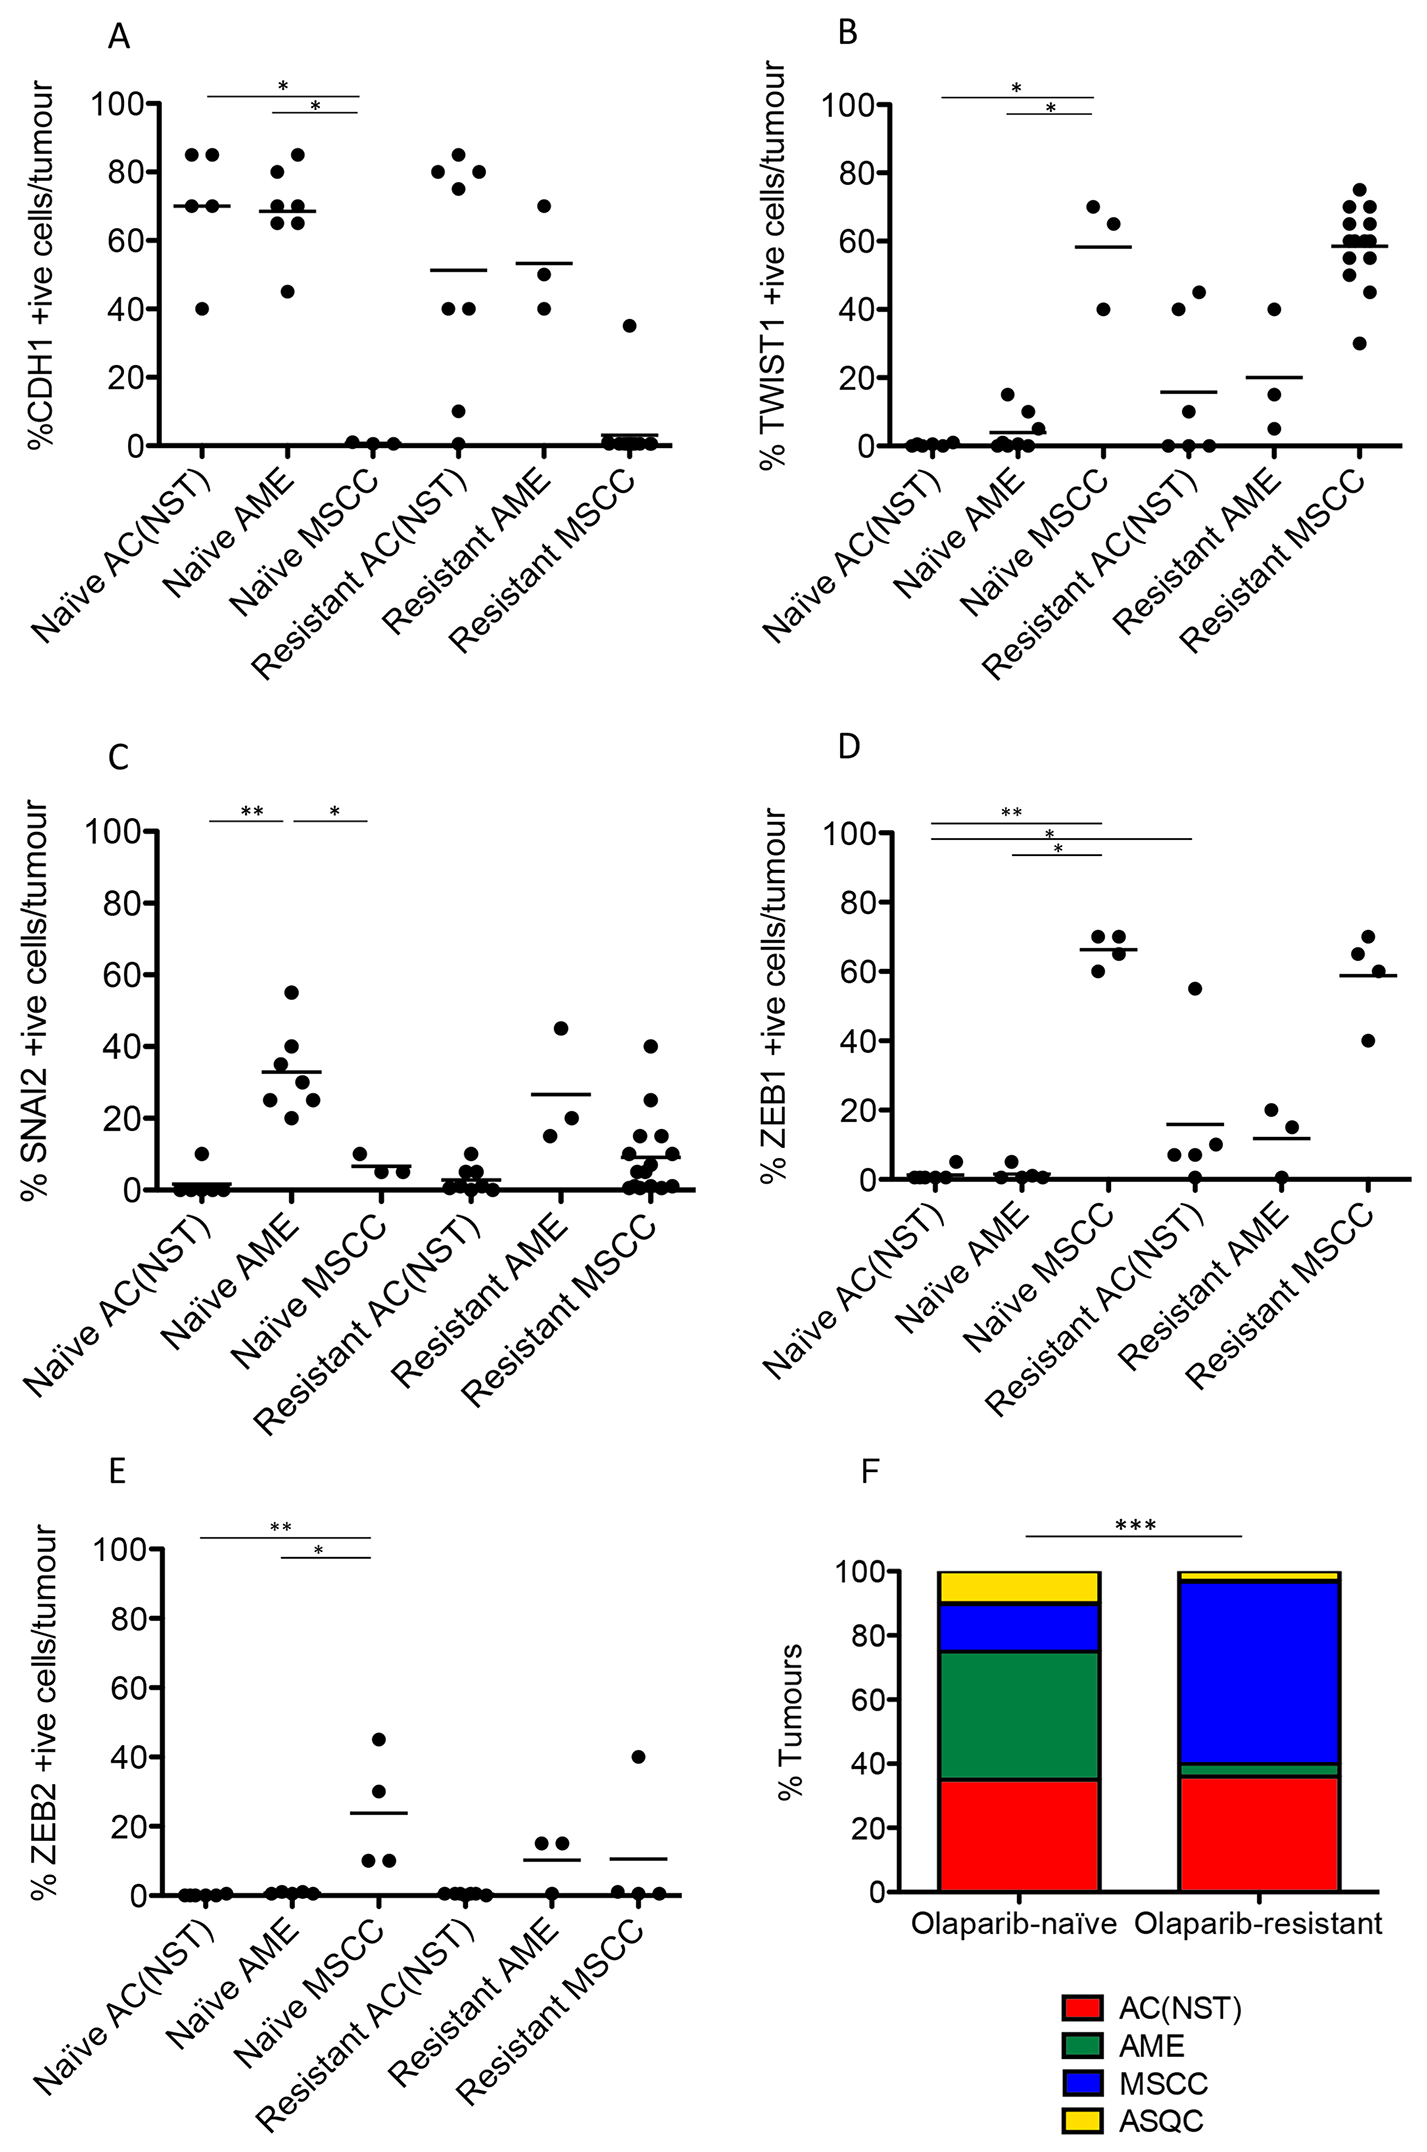 Olaparib-resistant Brca2/p53-mutant tumours are enriched for an EMT histotype.